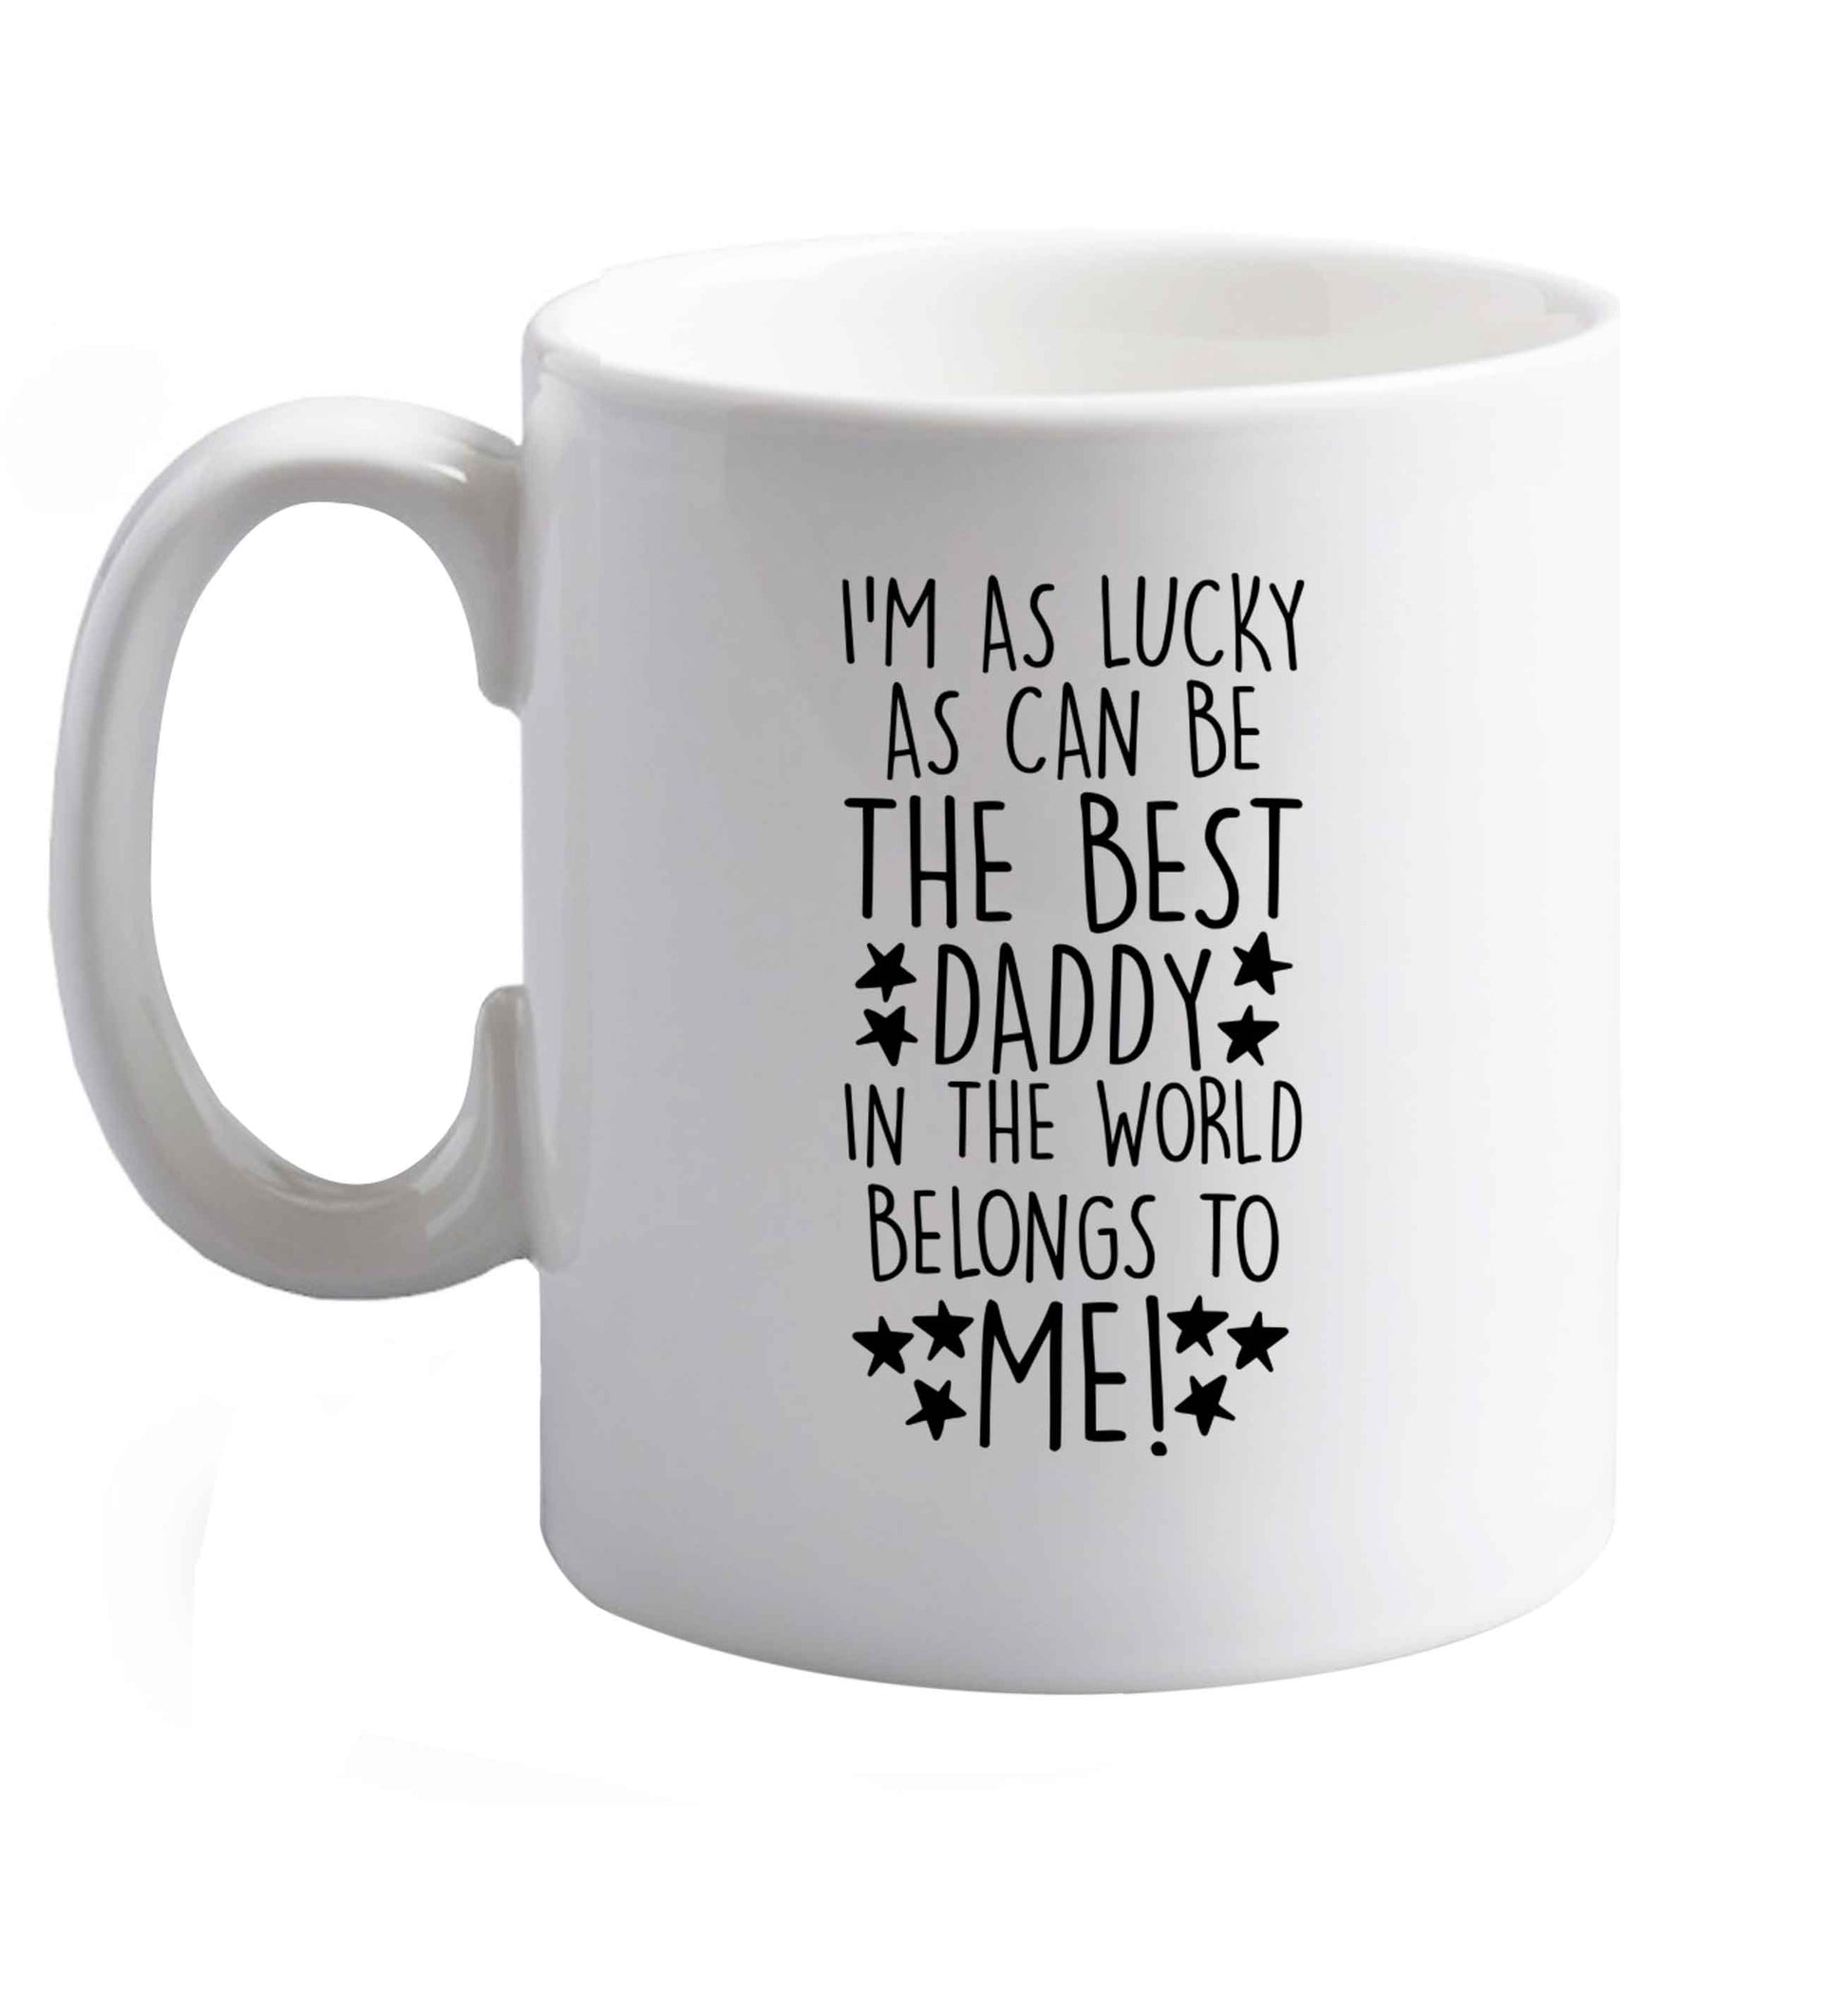 10 oz I'm as lucky as can be the worlds greatest dad belongs to me! ceramic mug right handed